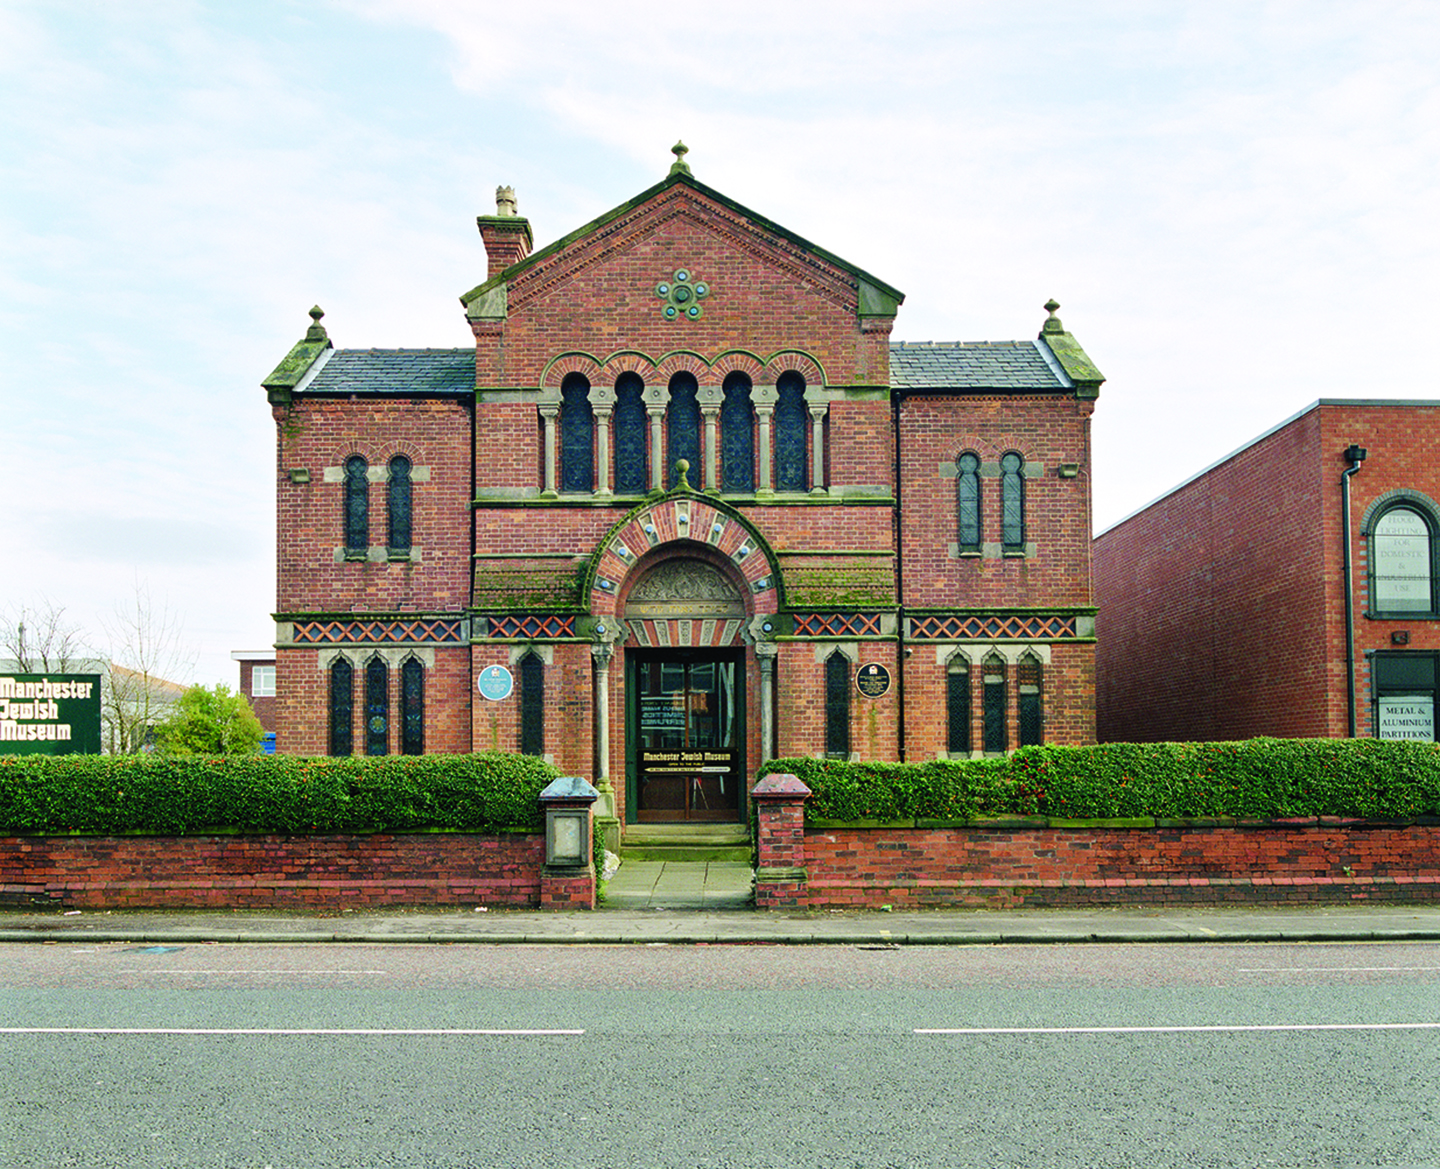 Former Manchester Spanish and Portuguese Synagogue, now Manchester Jewish Museum